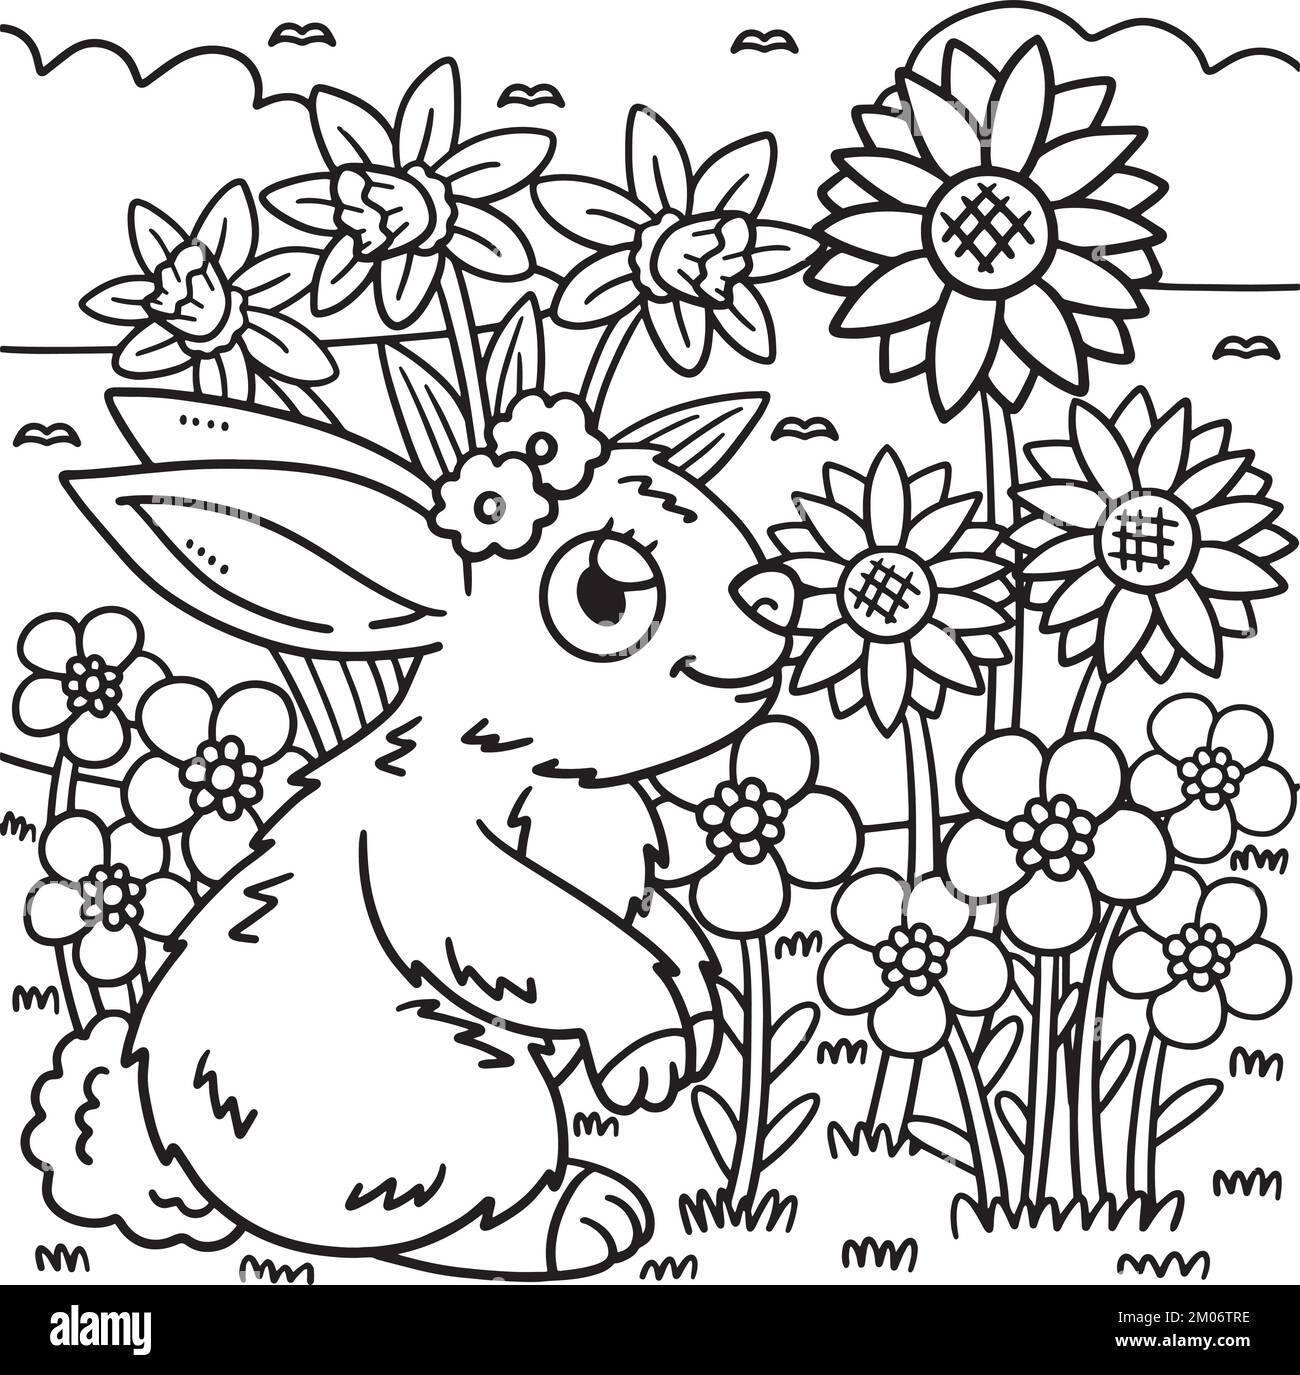 Rabbit line drawing cut out stock images pictures